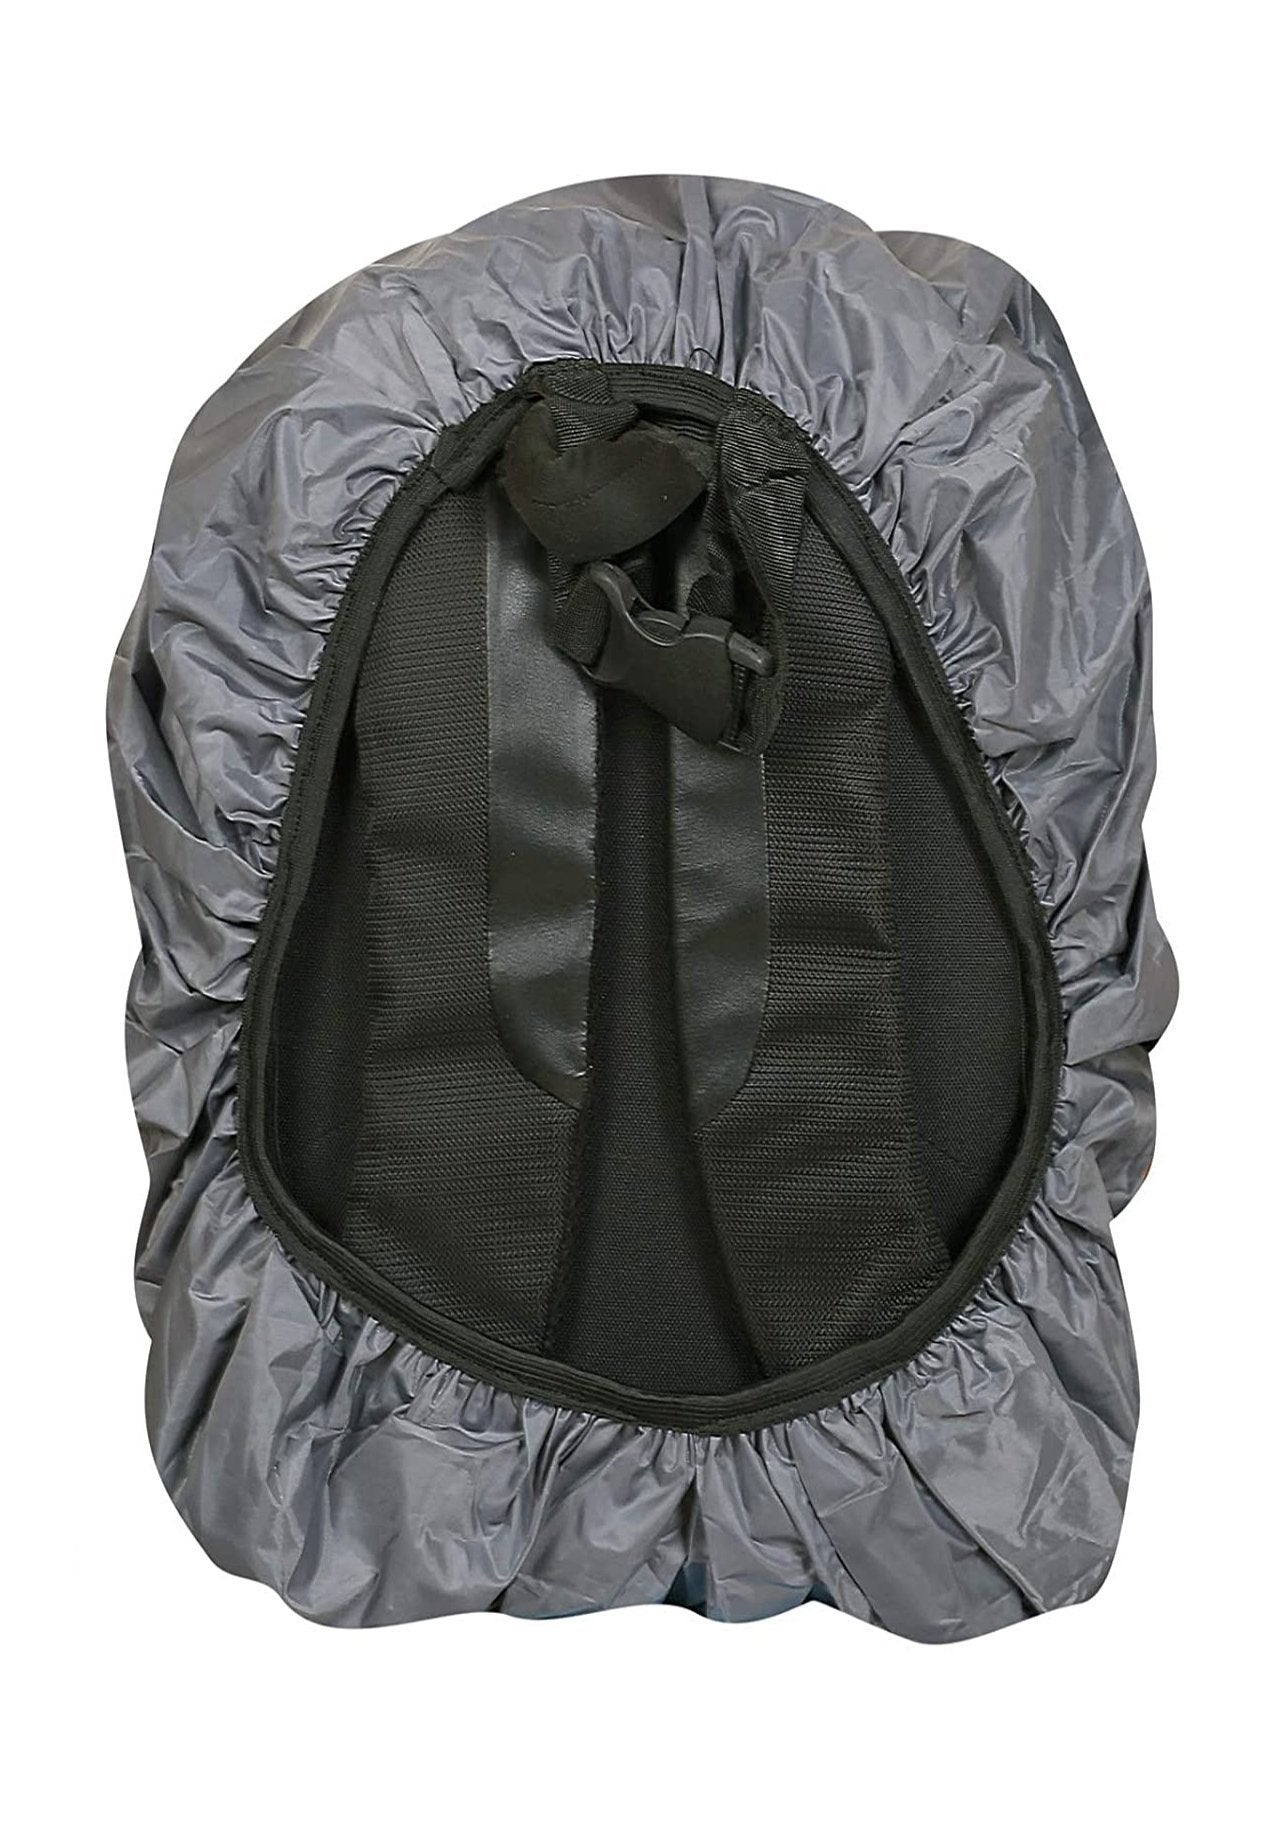 Dhariwal PU Water & Dustproof Cover for Backpack 40L-50L with Internal Push Clip Raincover Mohanlal Jain (Dhariwal Bags) 